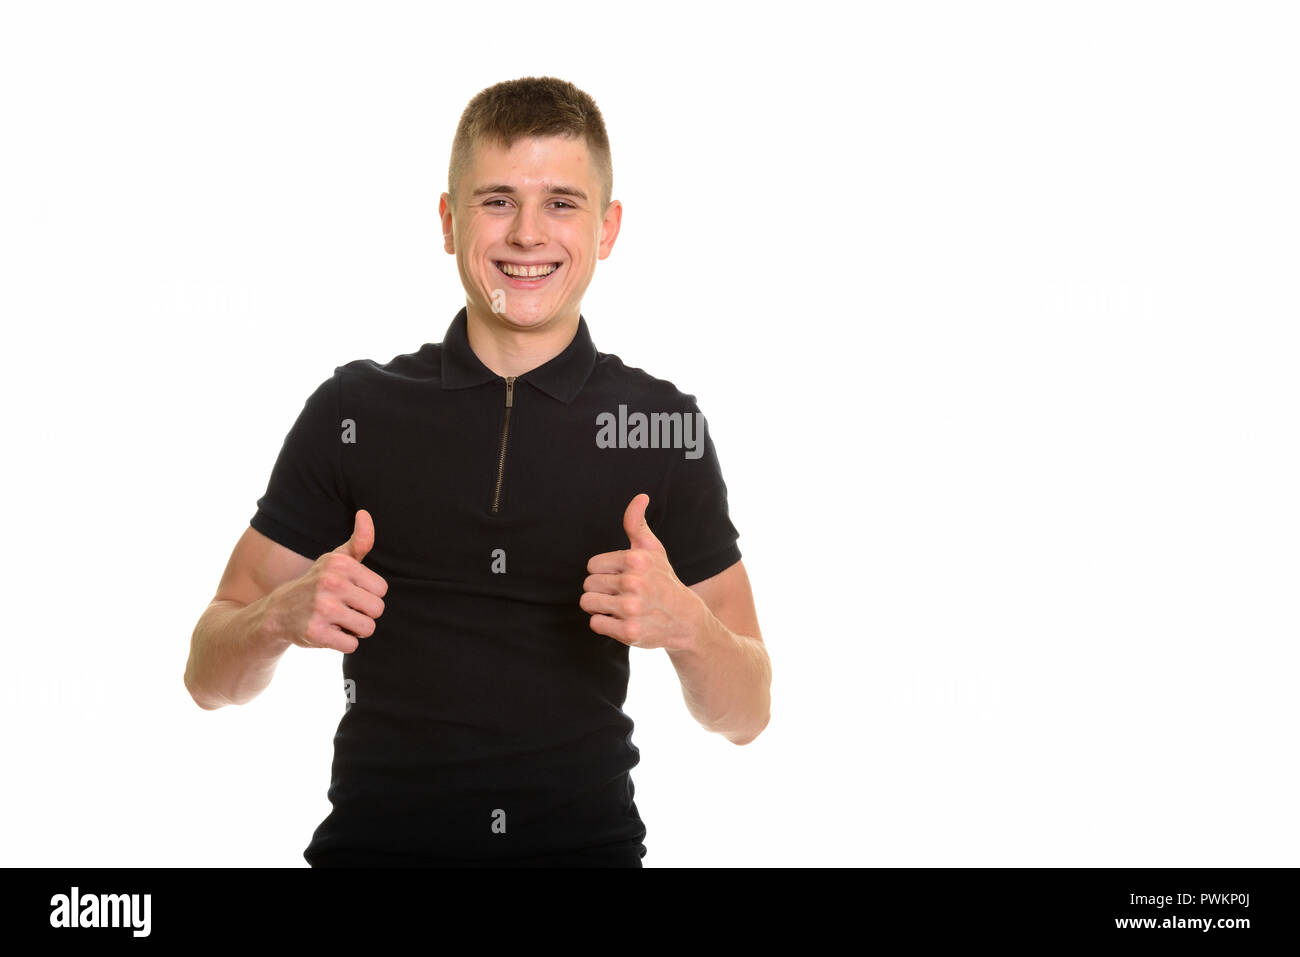 Young happy Caucasian man smiling and giving thumbs up Stock Photo